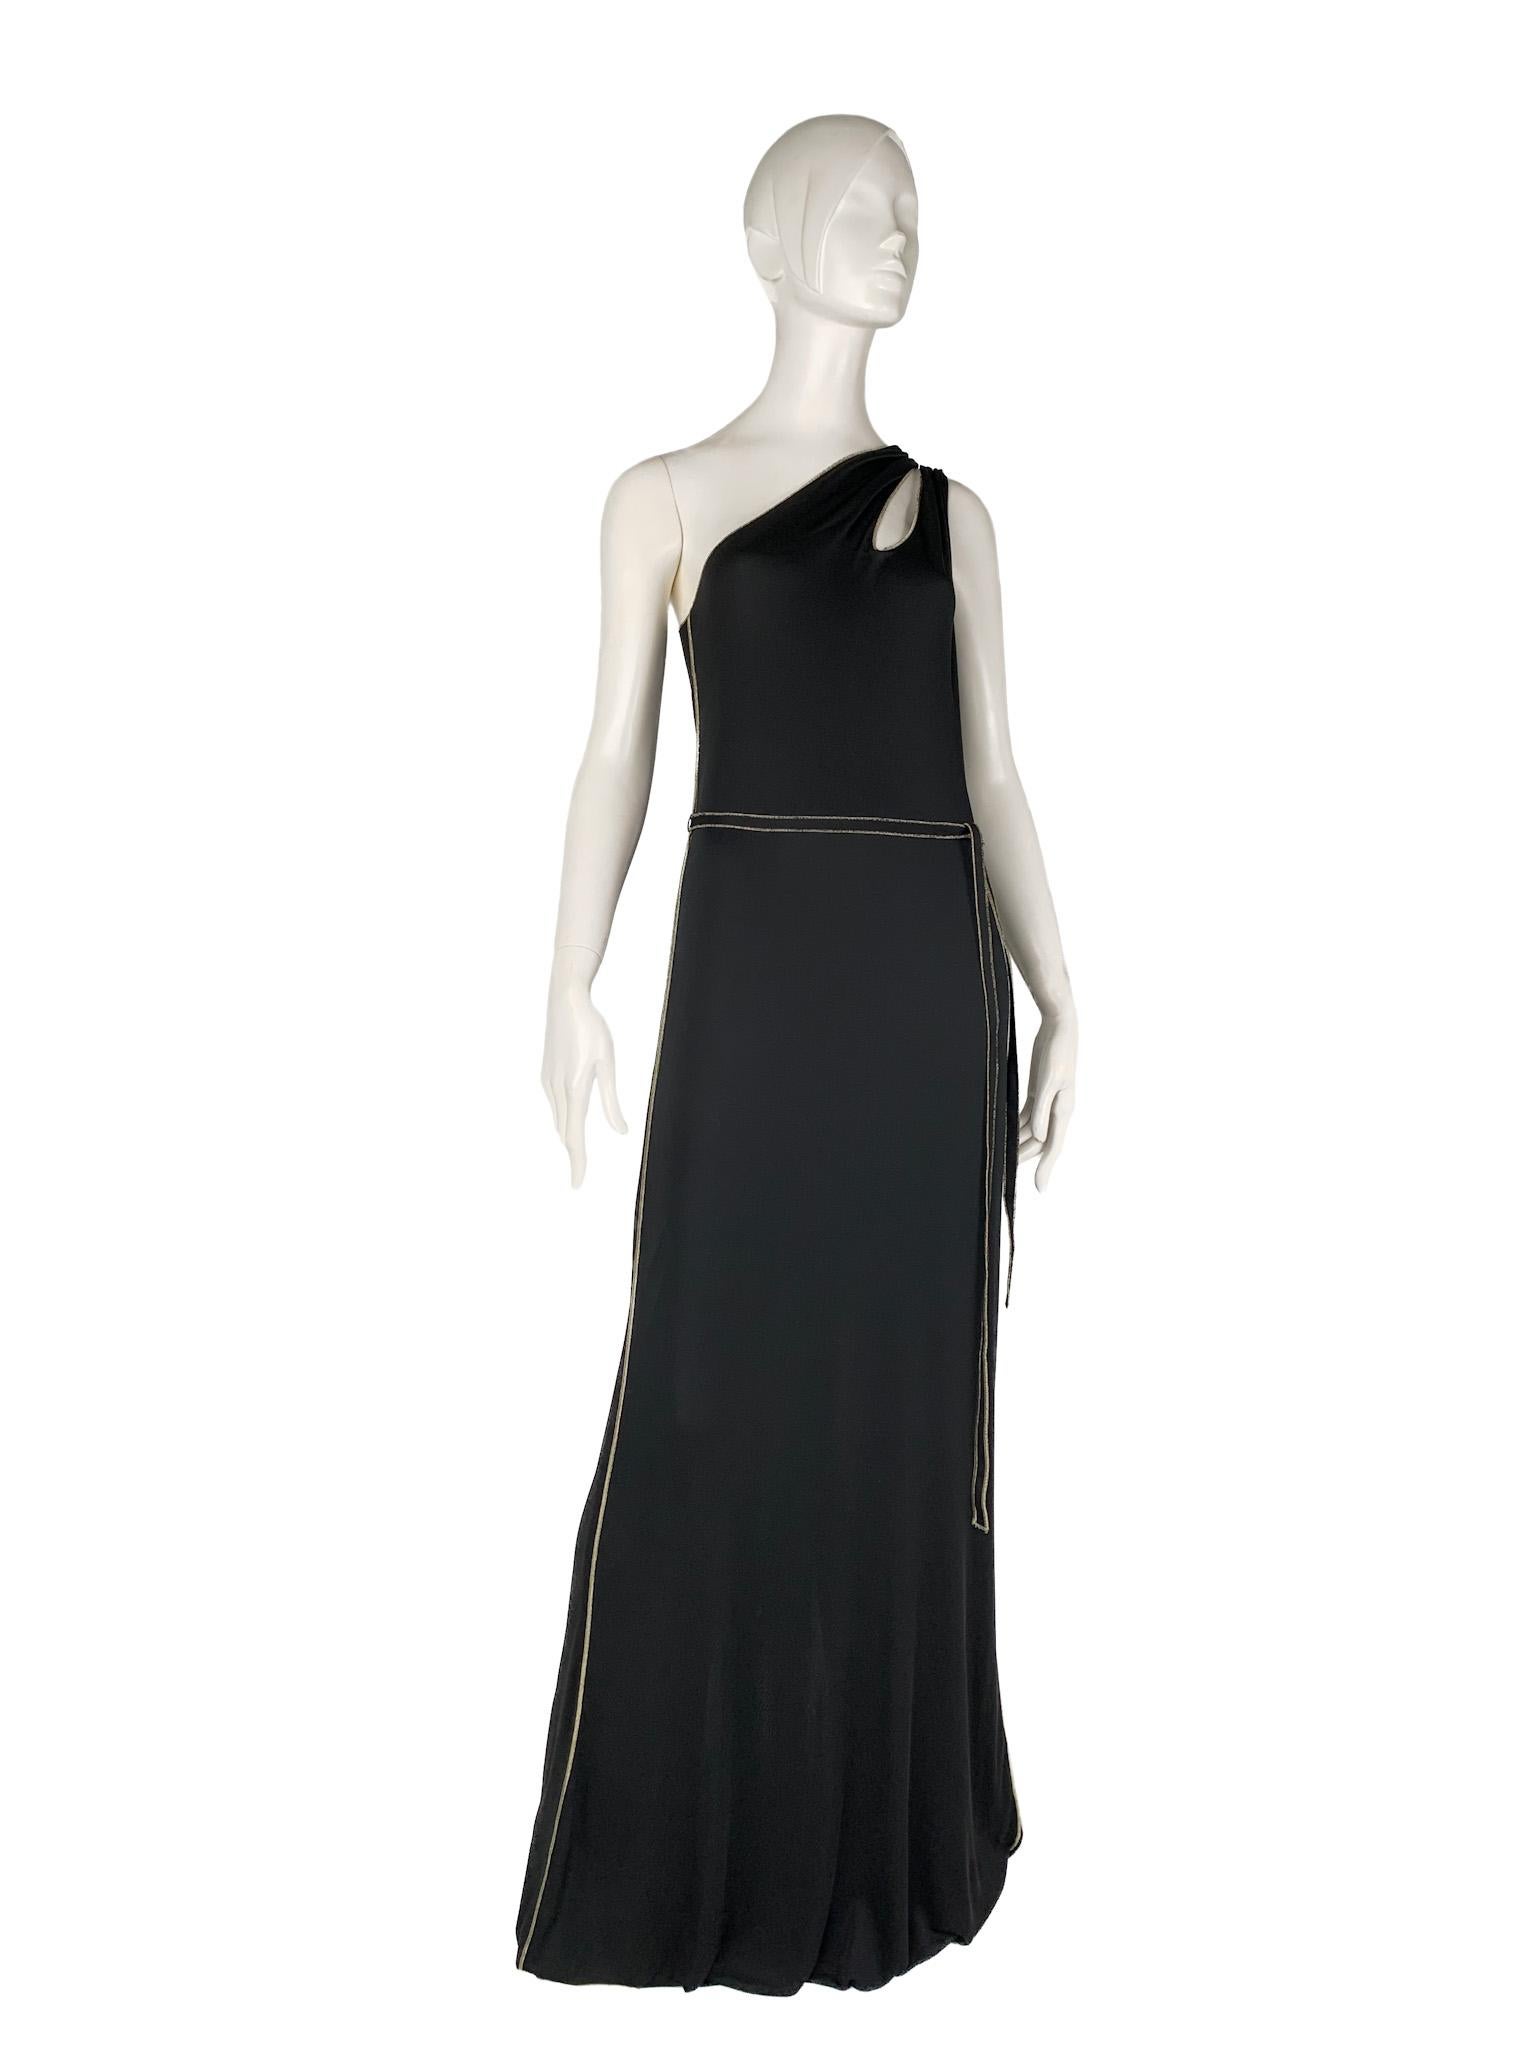 Gucci 2006 One-Shoulder Gown with Fringed Scarves/Train, Cutouts, Gold Topstitch 1